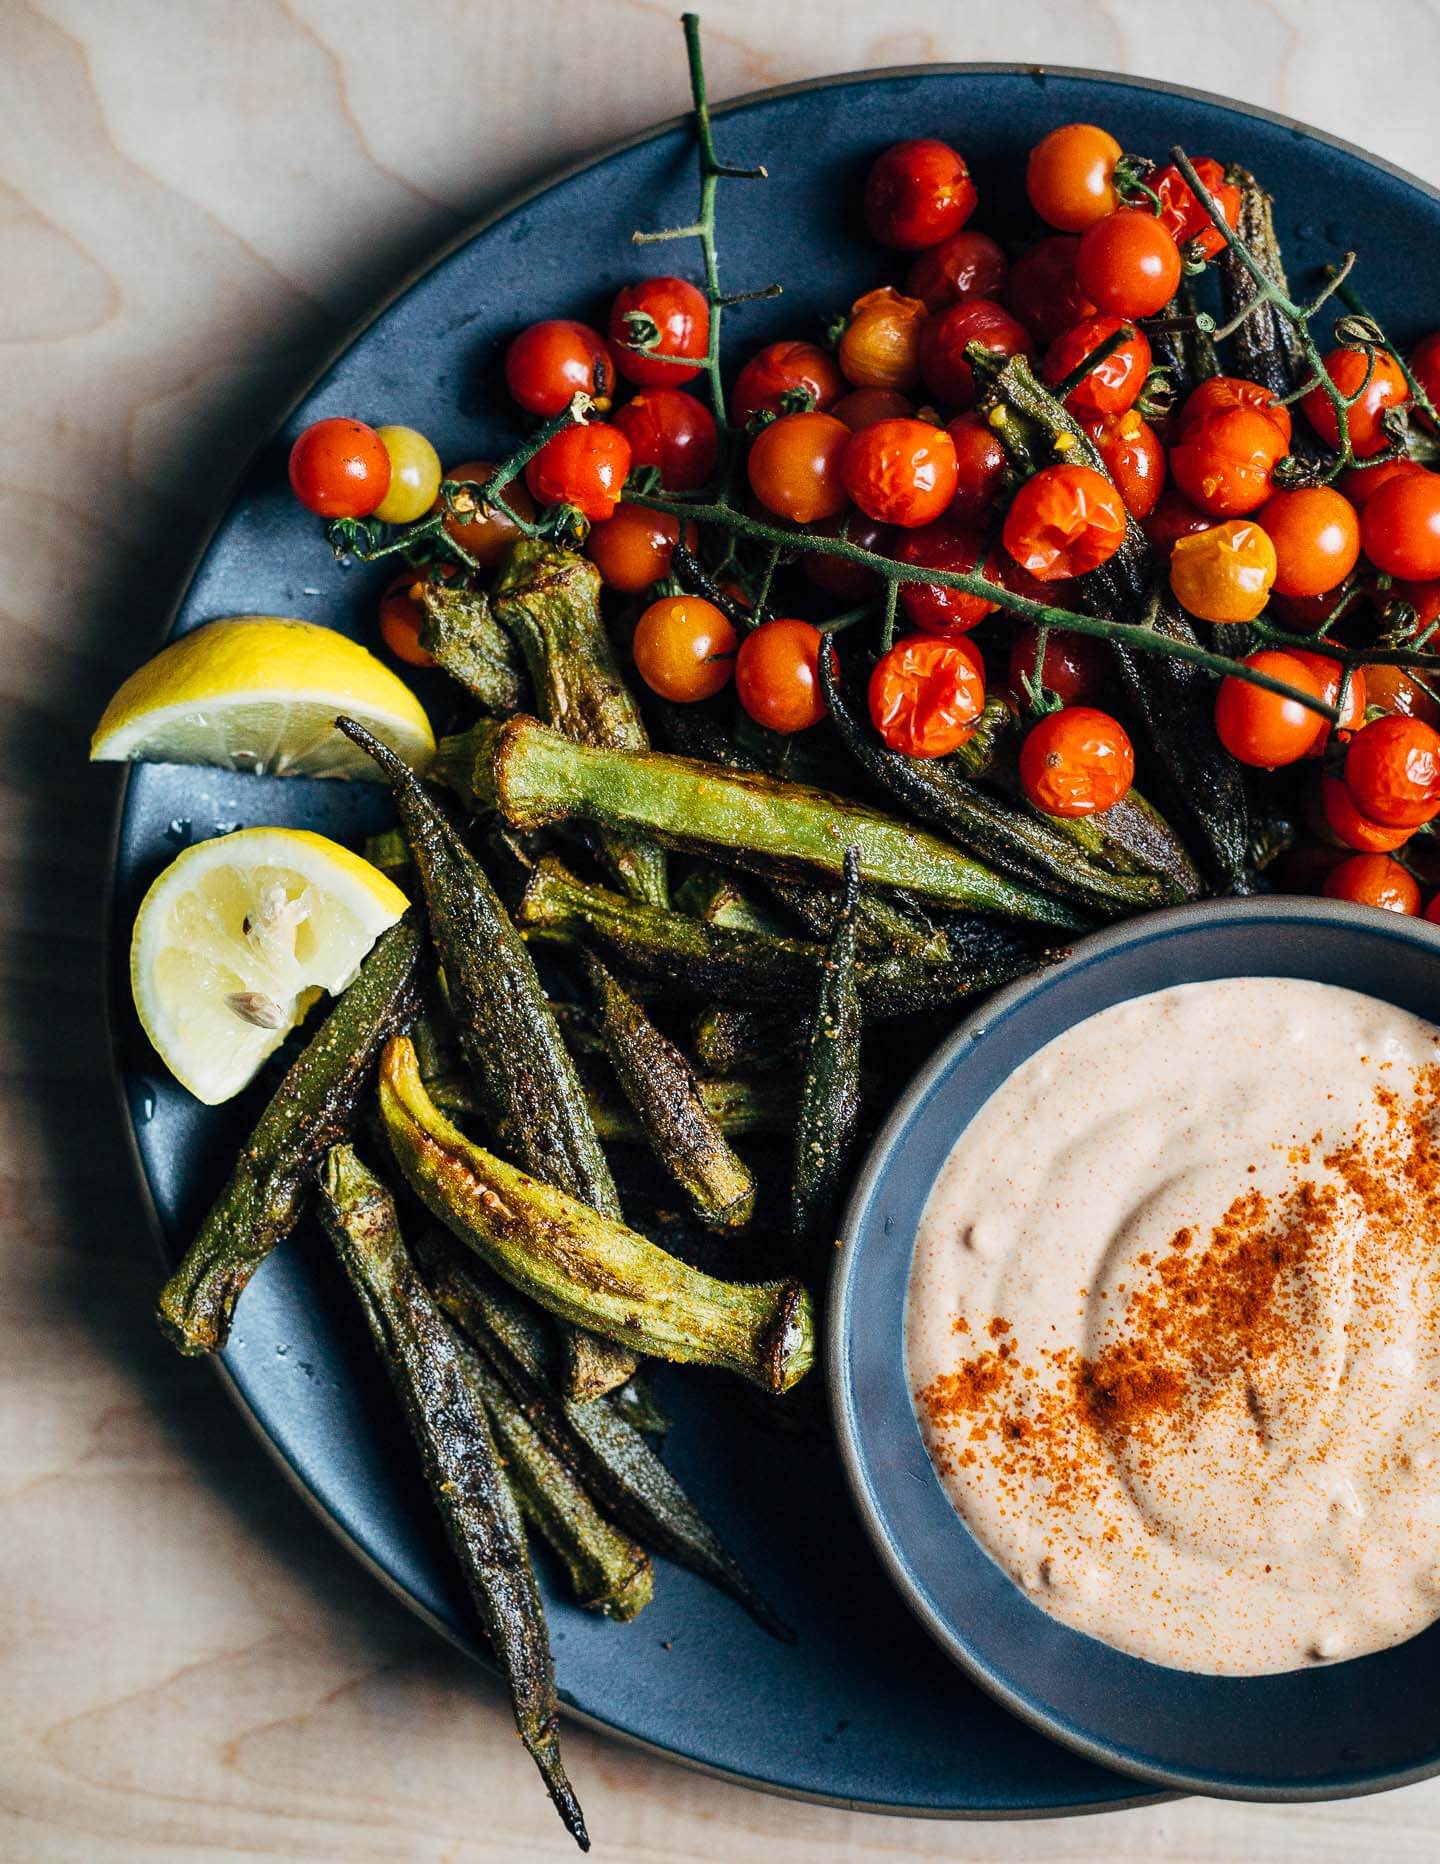 Perfect as a side or light summer meal, crispy roasted okra and cherry tomato bunches are served alongside an irresistible (cheater) pimentón aioli made with store bought mayo and smoked paprika. 